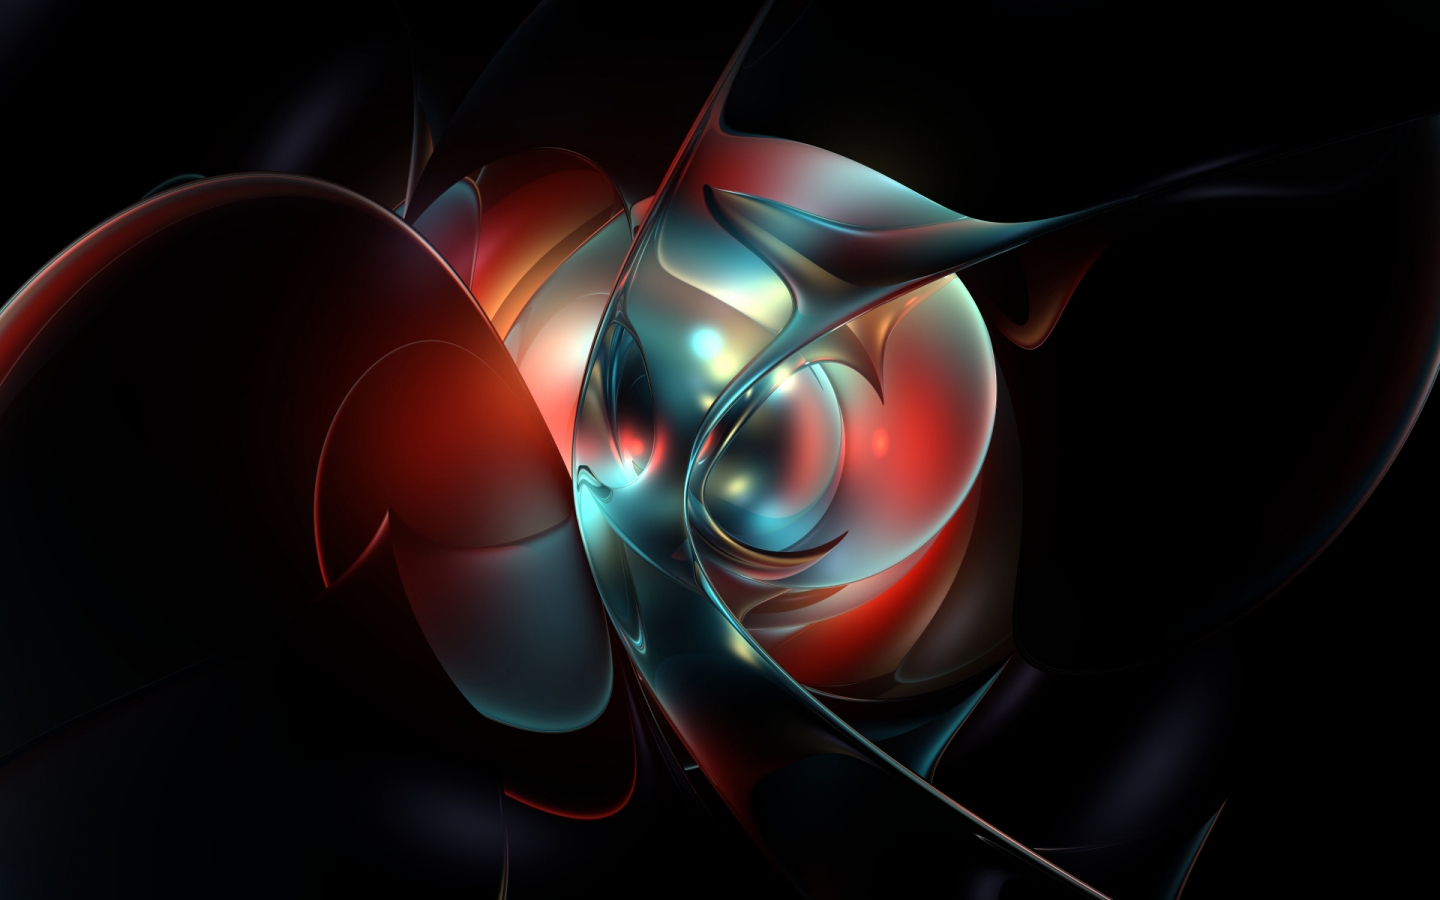 Abstract Geometric Shapes for 1440 x 900 widescreen resolution